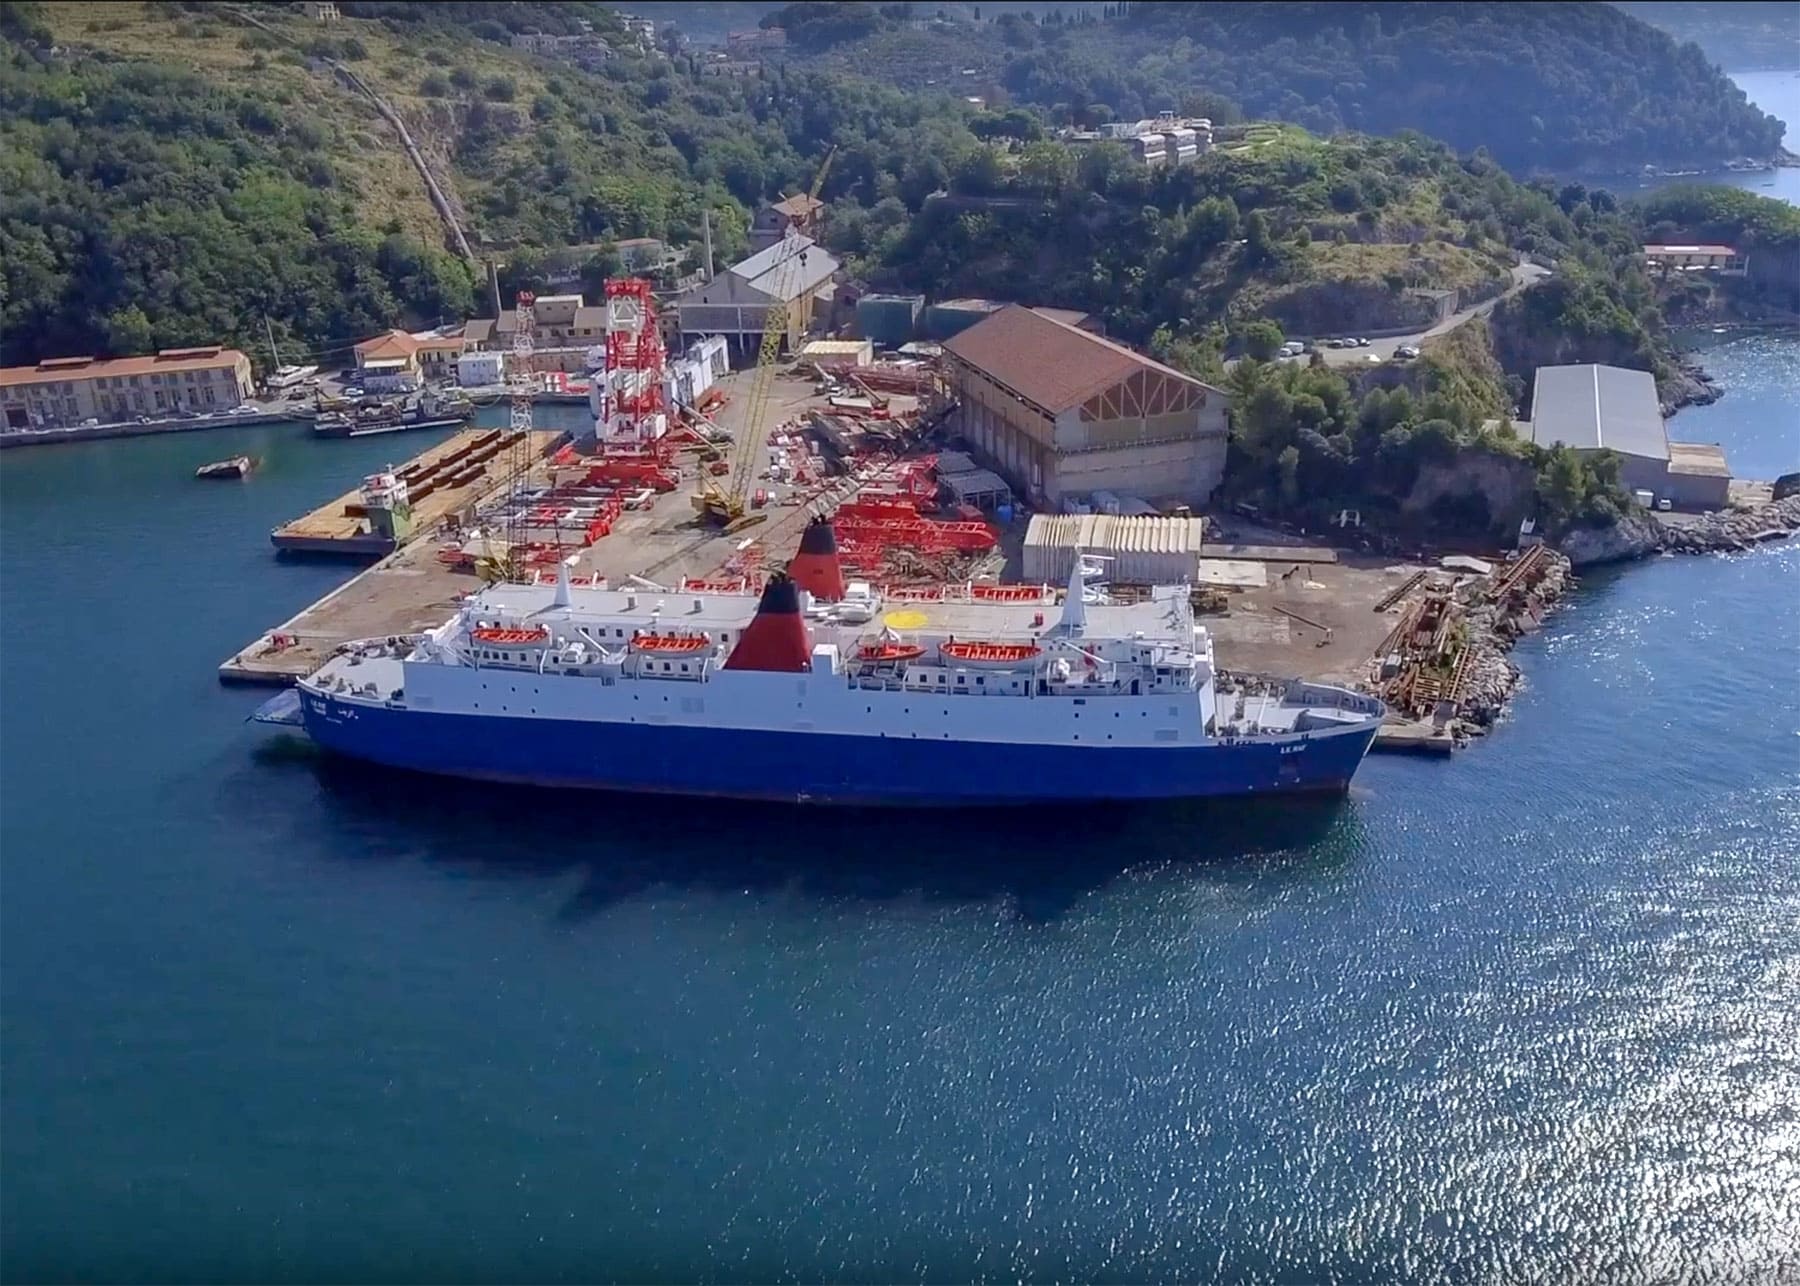 LE RIF nearing the end of her refurbishment during 2018 at Jobson Italia's Naples yard. Copyright © Jobson Italia (Screen grab from video).